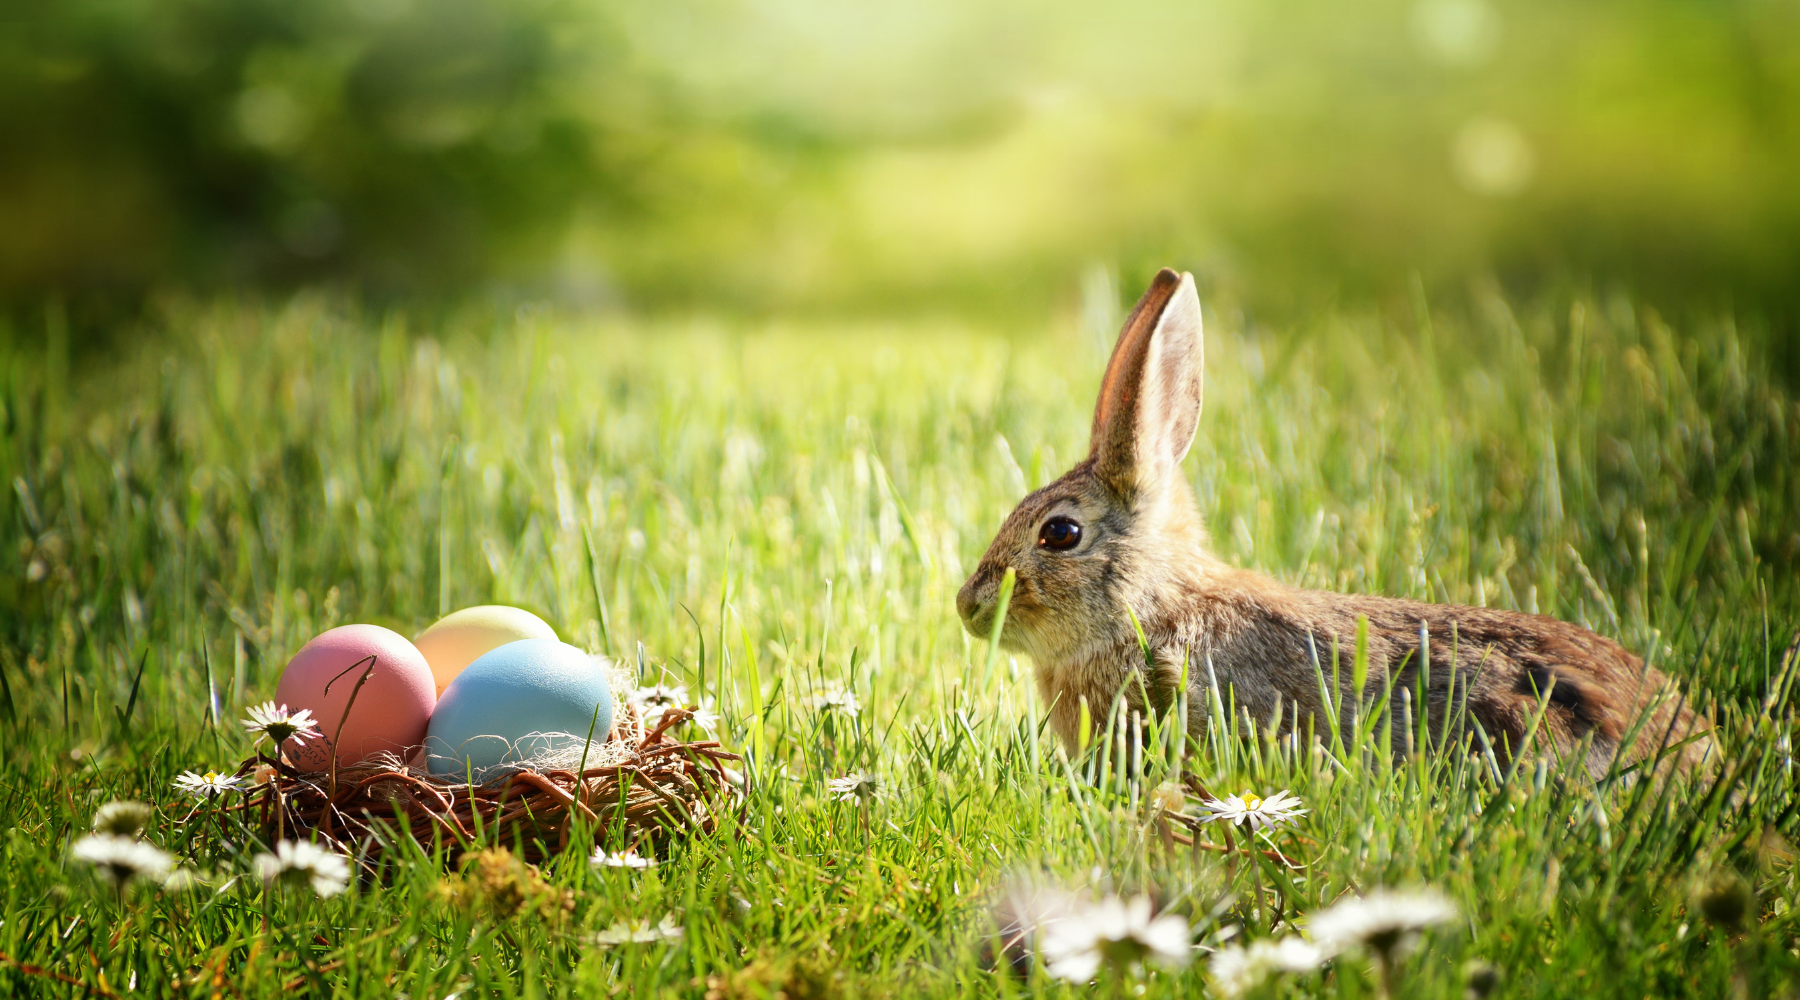 Get Outside and Enjoy Easter Fun This Year!